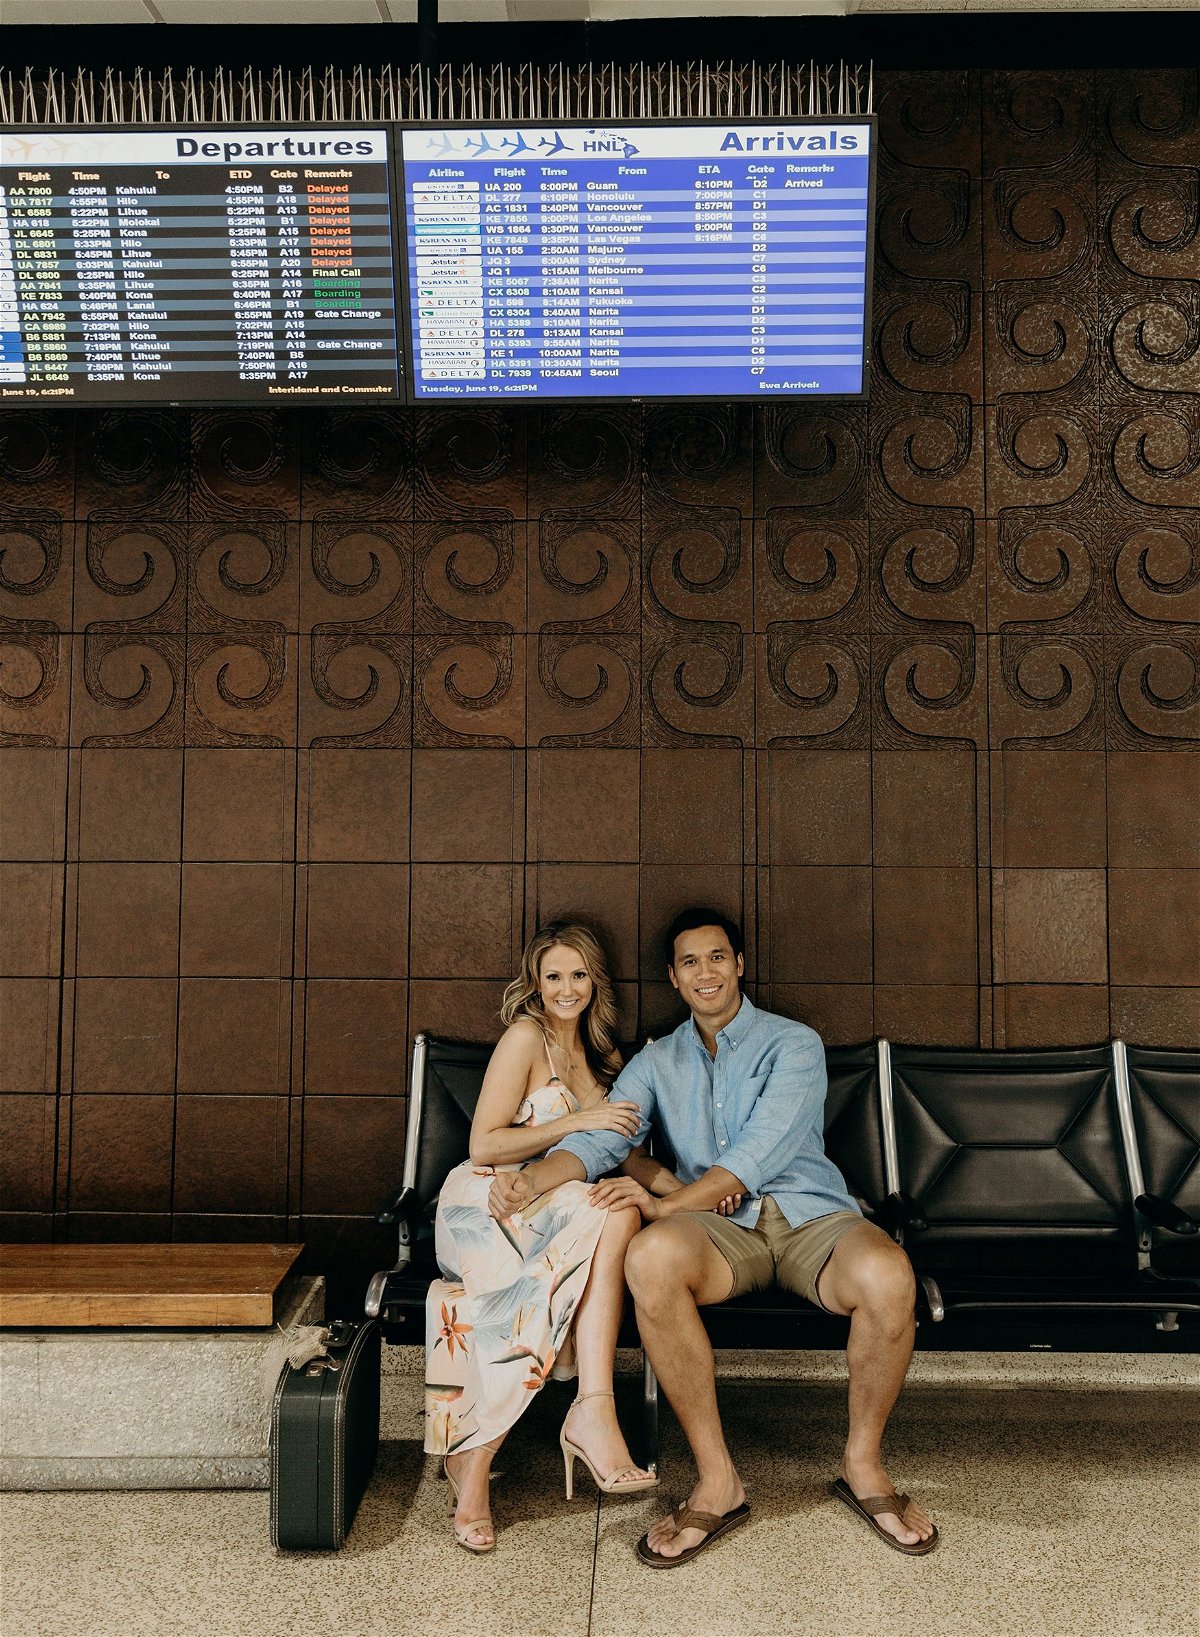 <i>Keani Bakula Photography (@keanibakula/keanibakula.com) via CNN Newsource</i><br/>Christian Friese was trying to find her way at Honolulu Airport when Aaron Maluo stepped in and showed her the way to her gate. Christian and Aaron instantly connected